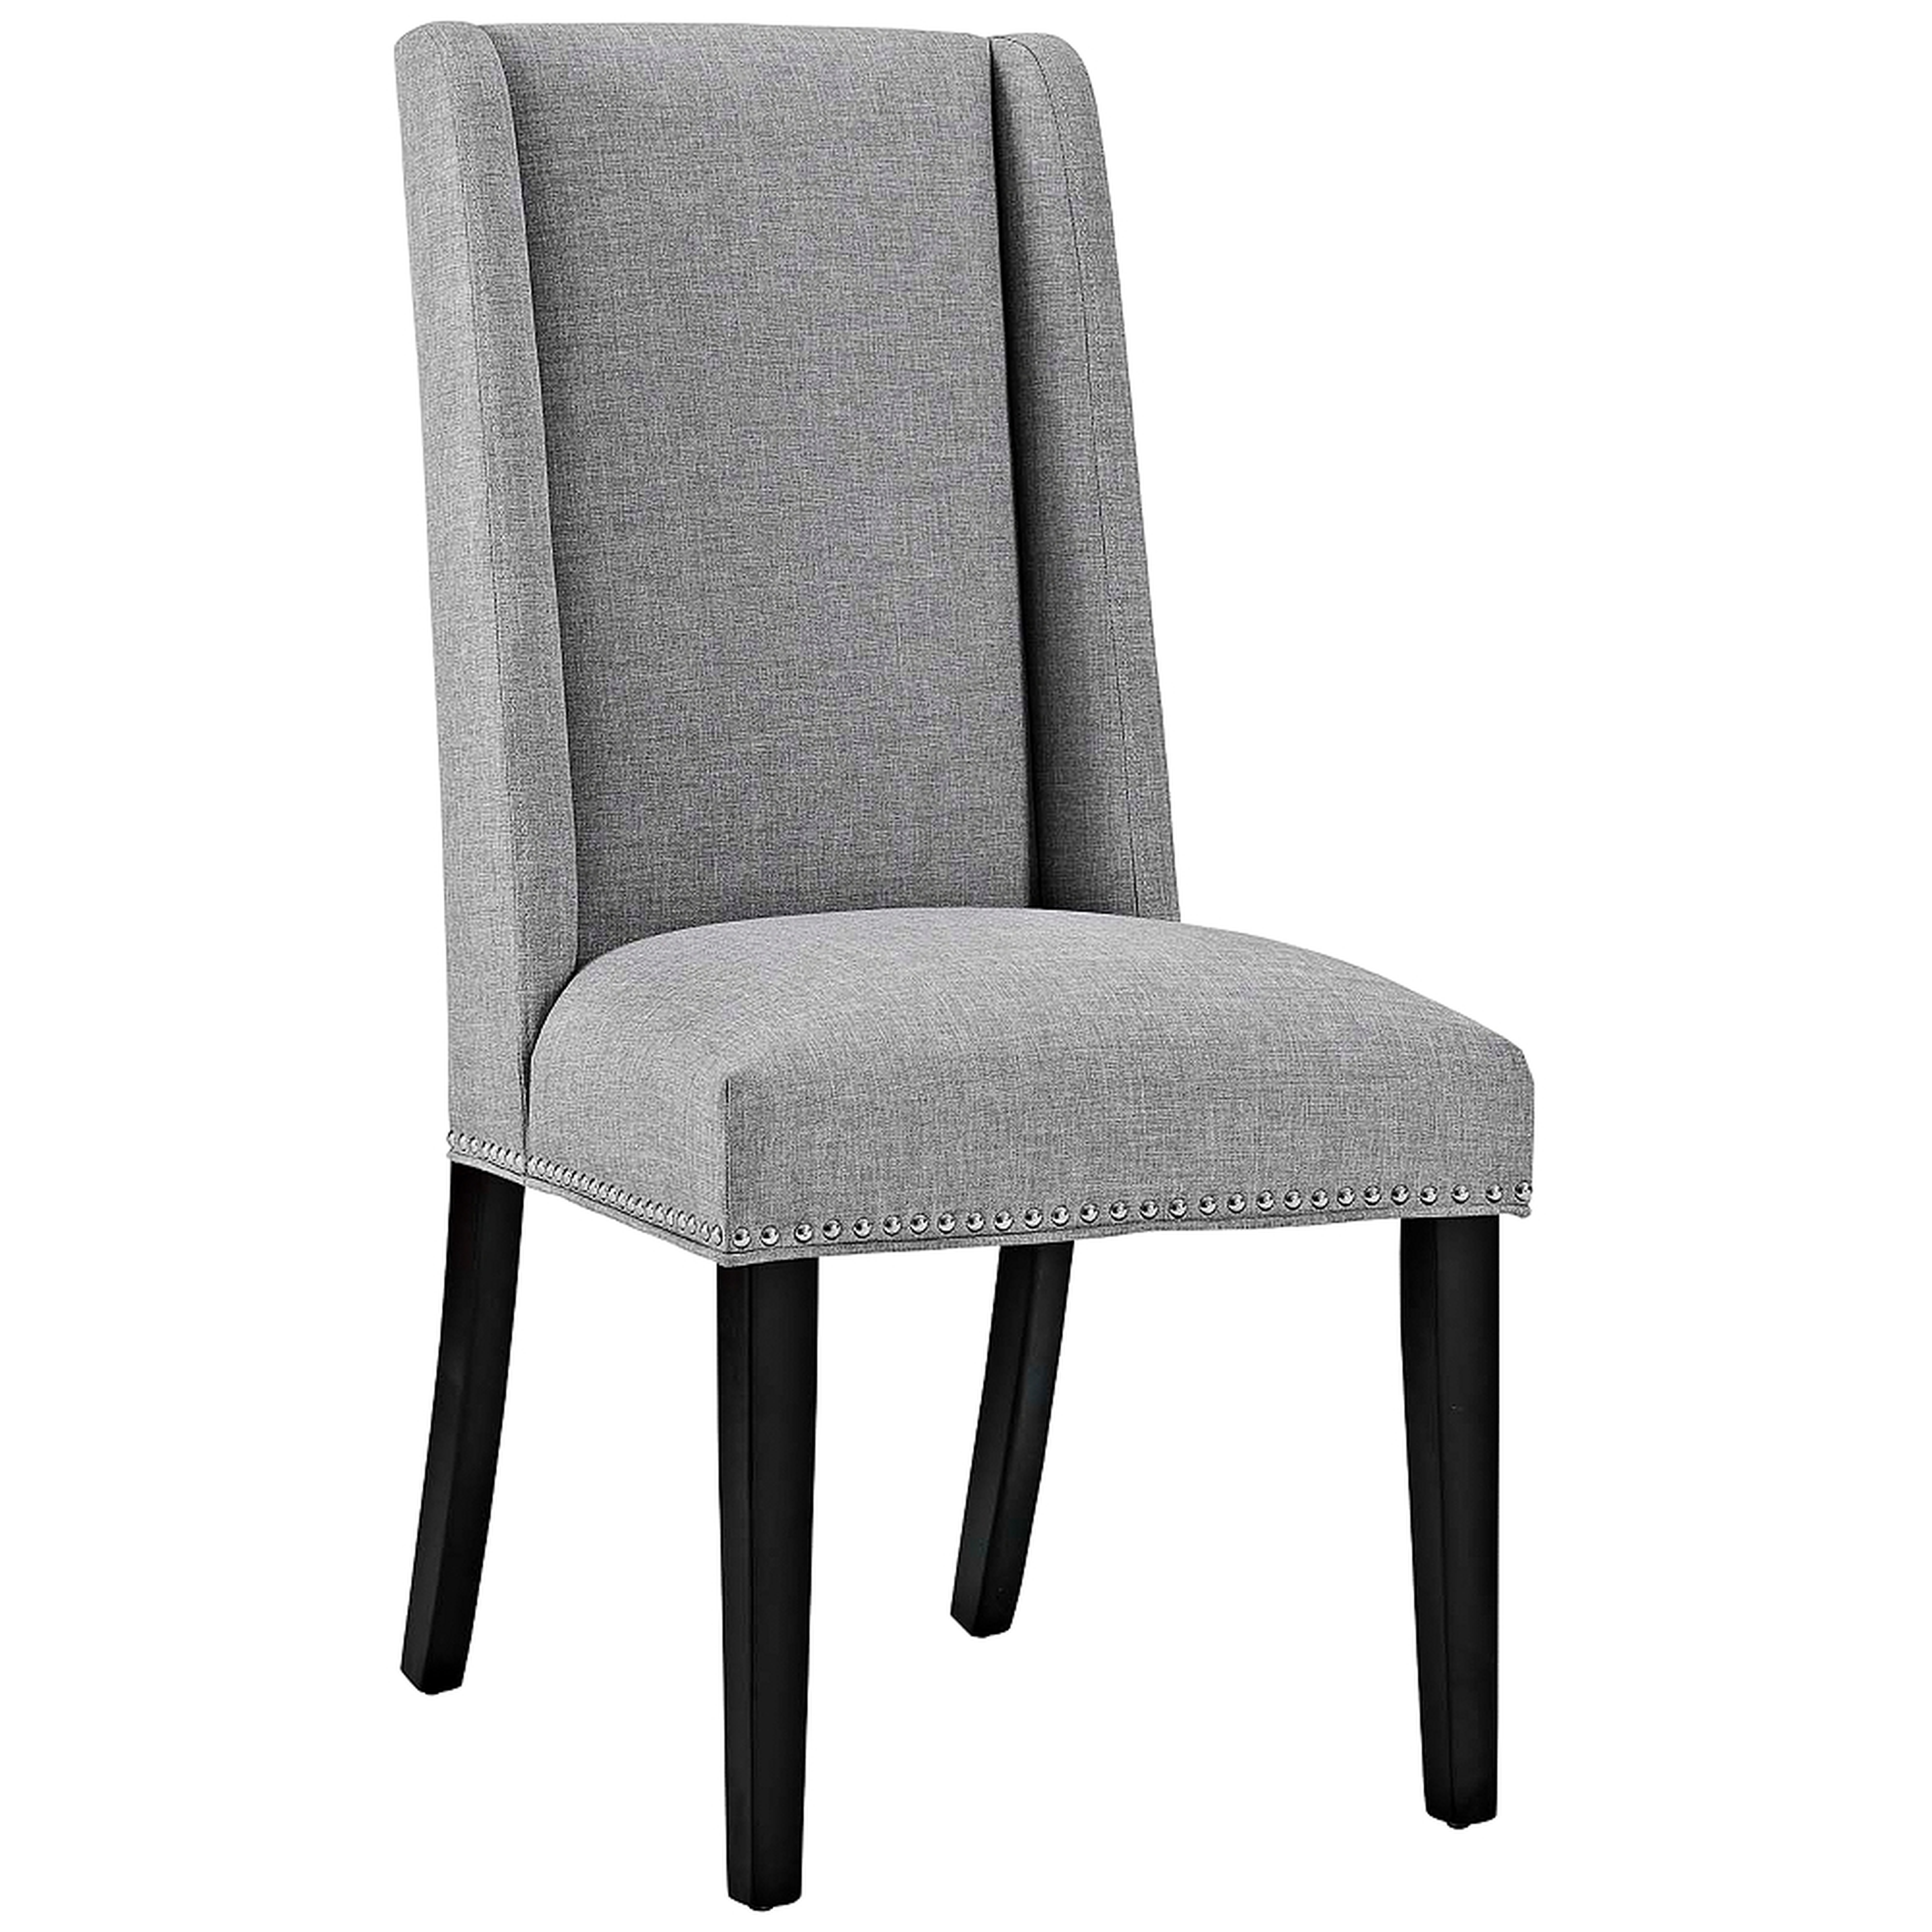 Baron Light Gray Fabric Dining Chair - Style # 33T54 - Lamps Plus